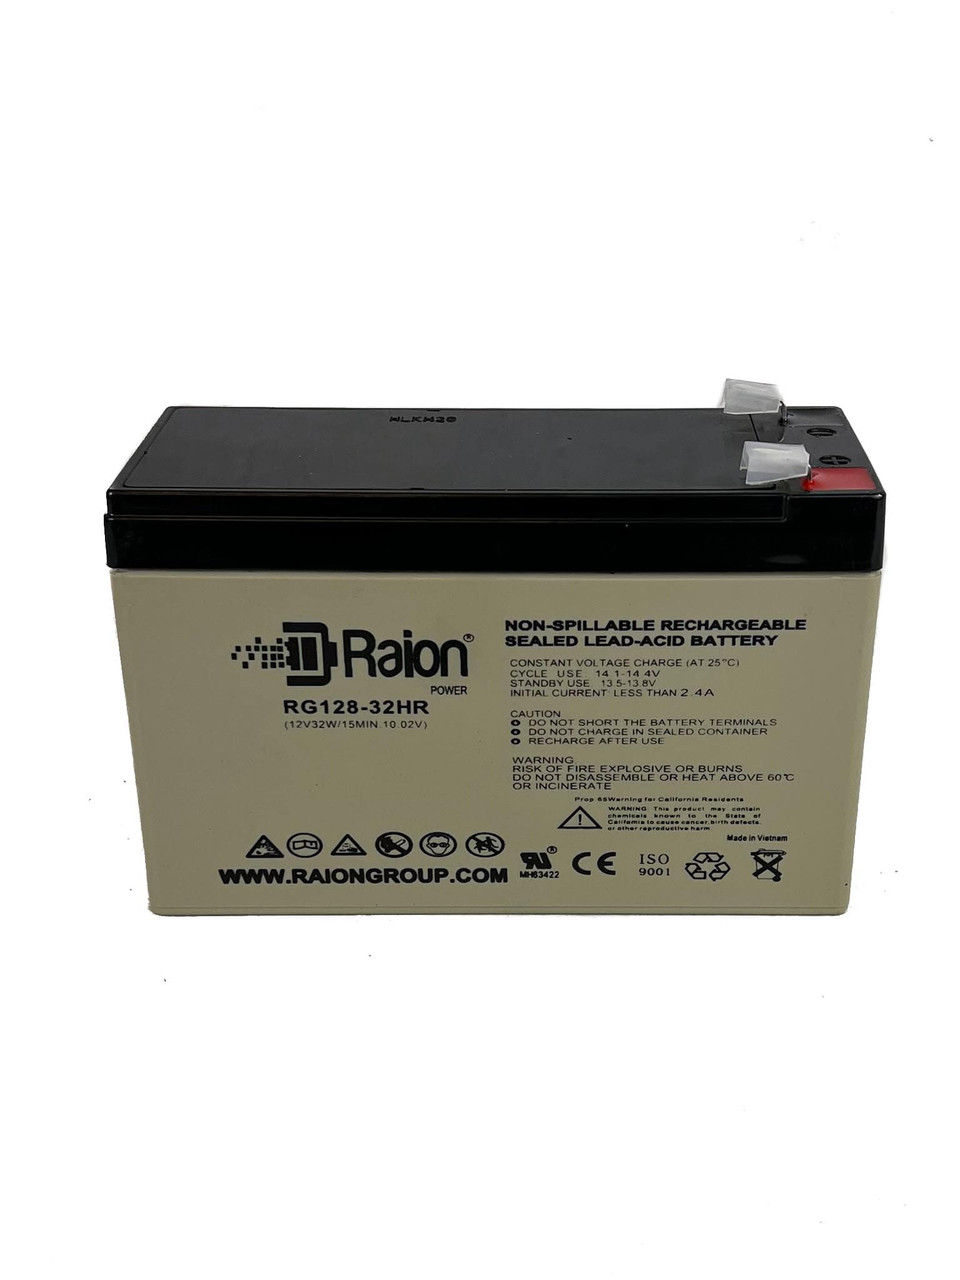 Raion Power RG128-32HR Replacement High Rate Battery Cartridge for Clary UPS11K1GR